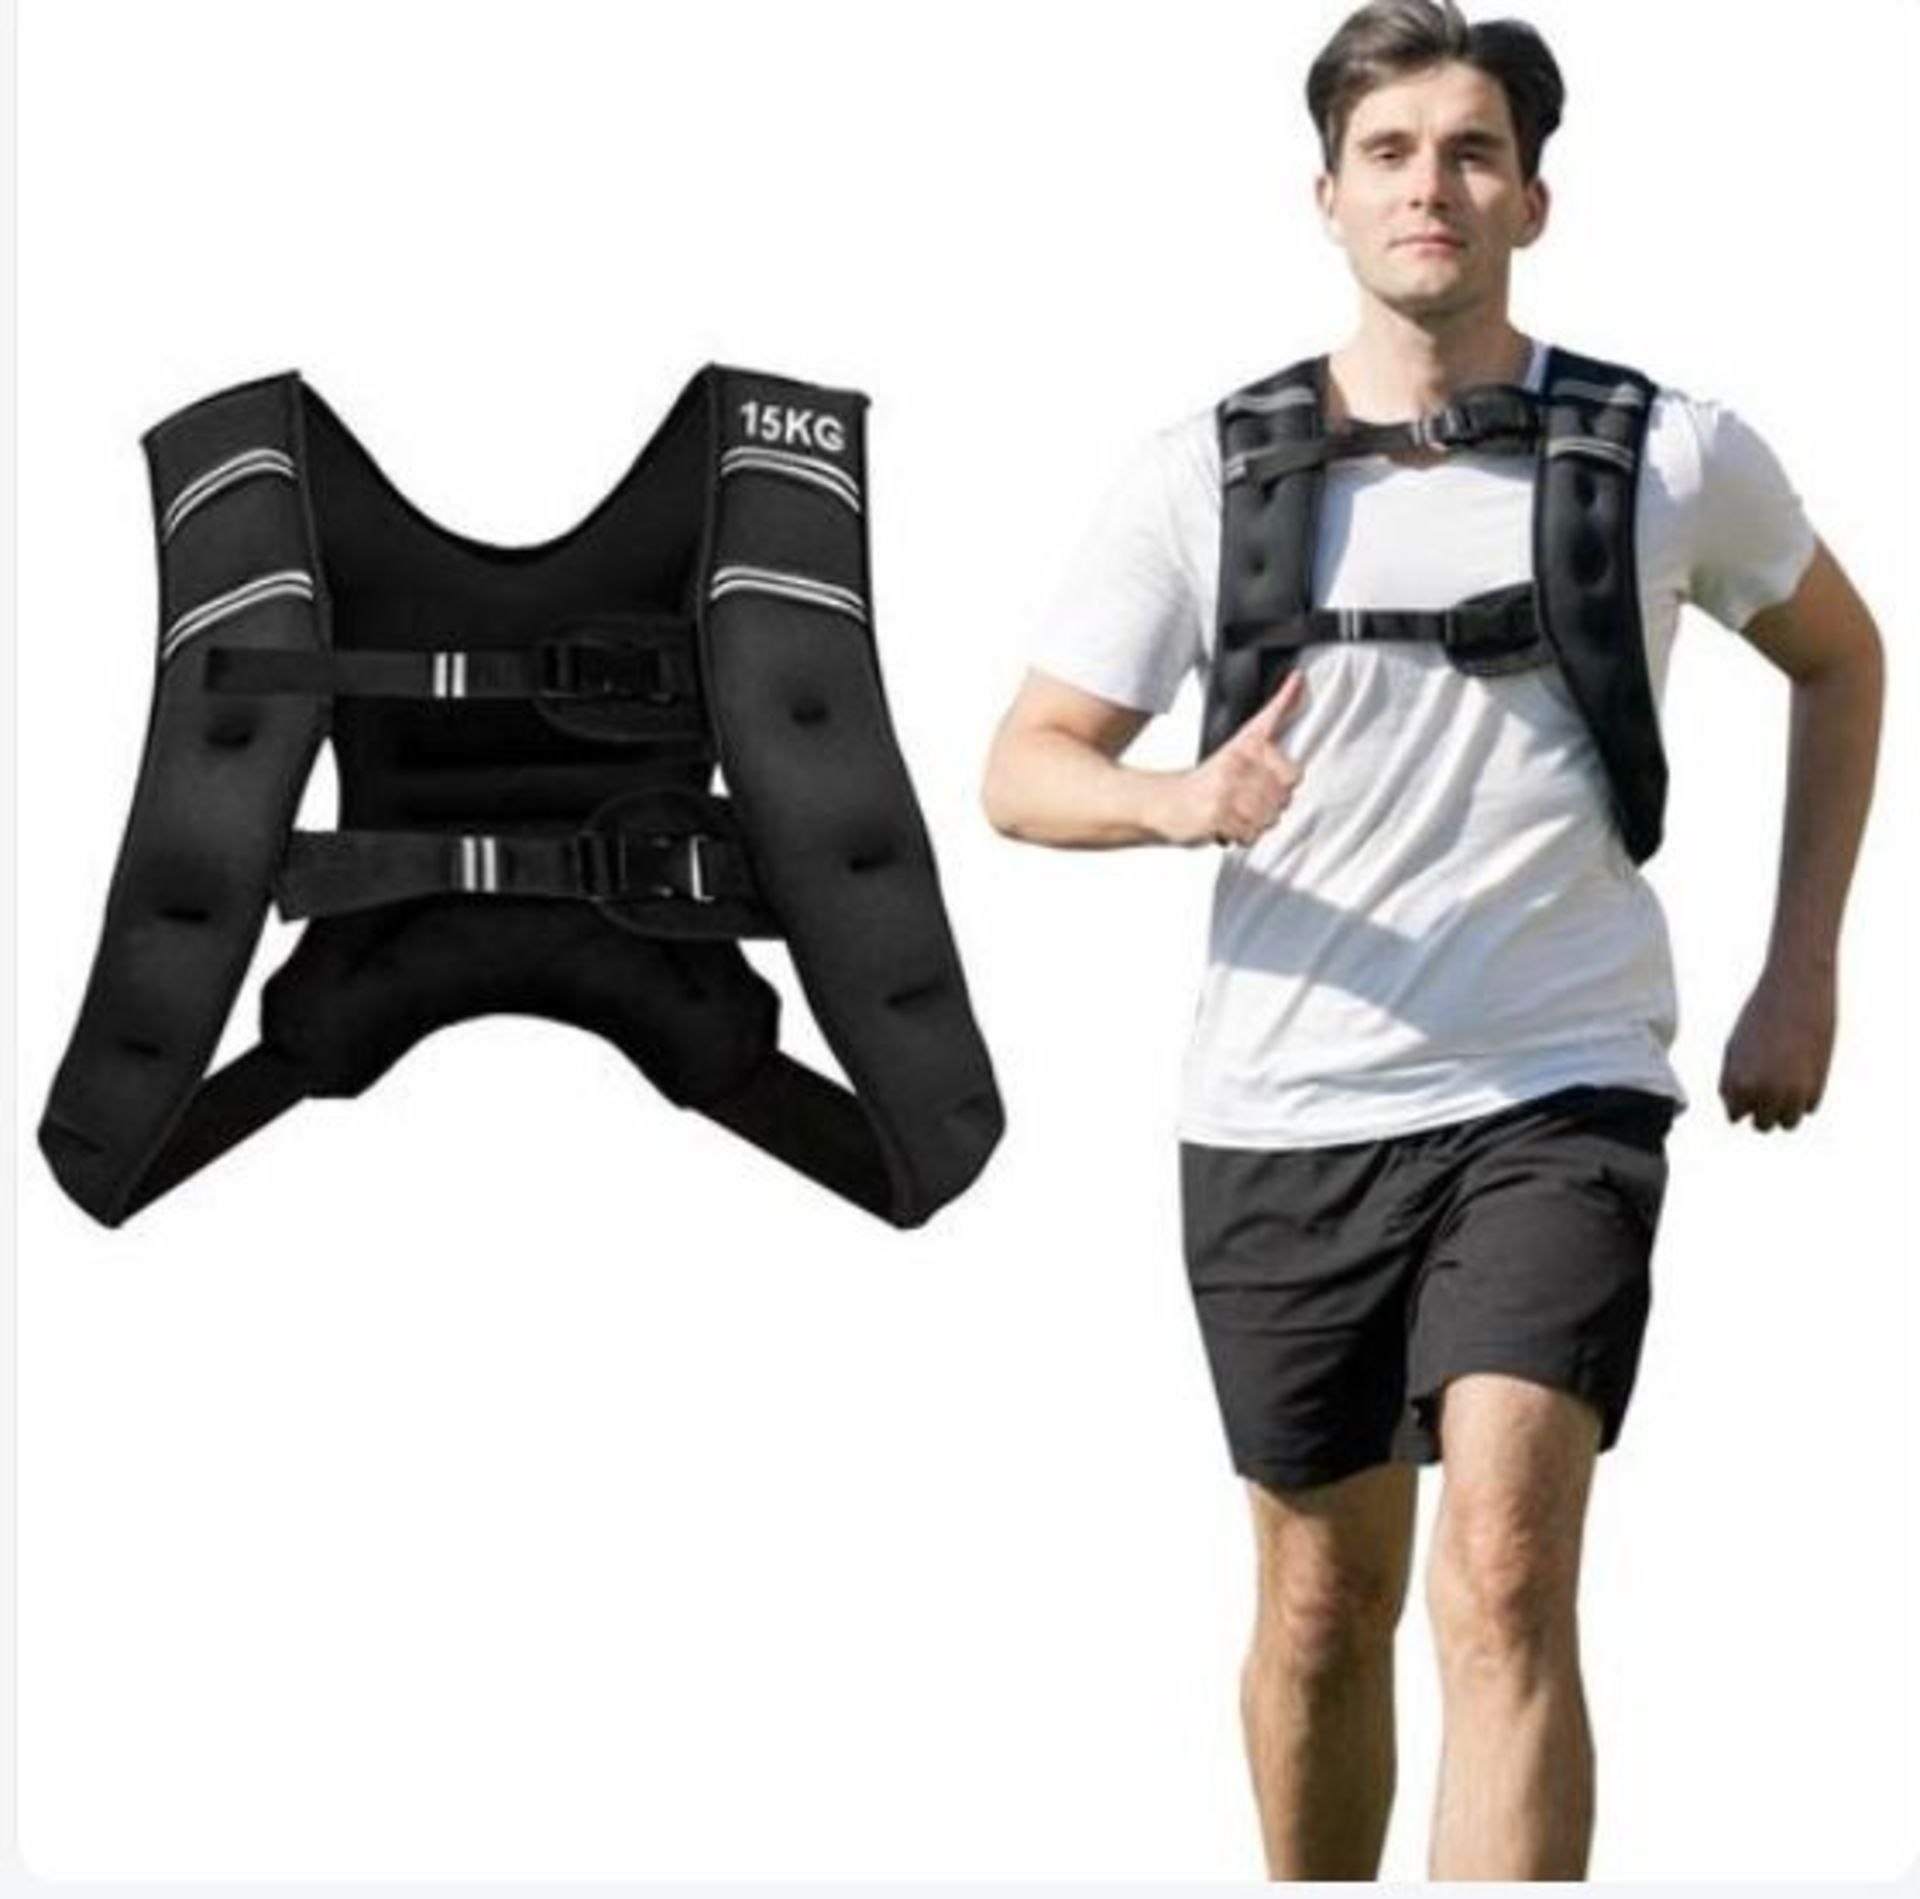 Weighted Vest Gym Running Fitness Sports Training Weight Loss 15KG Workout Vest. - R14.6.